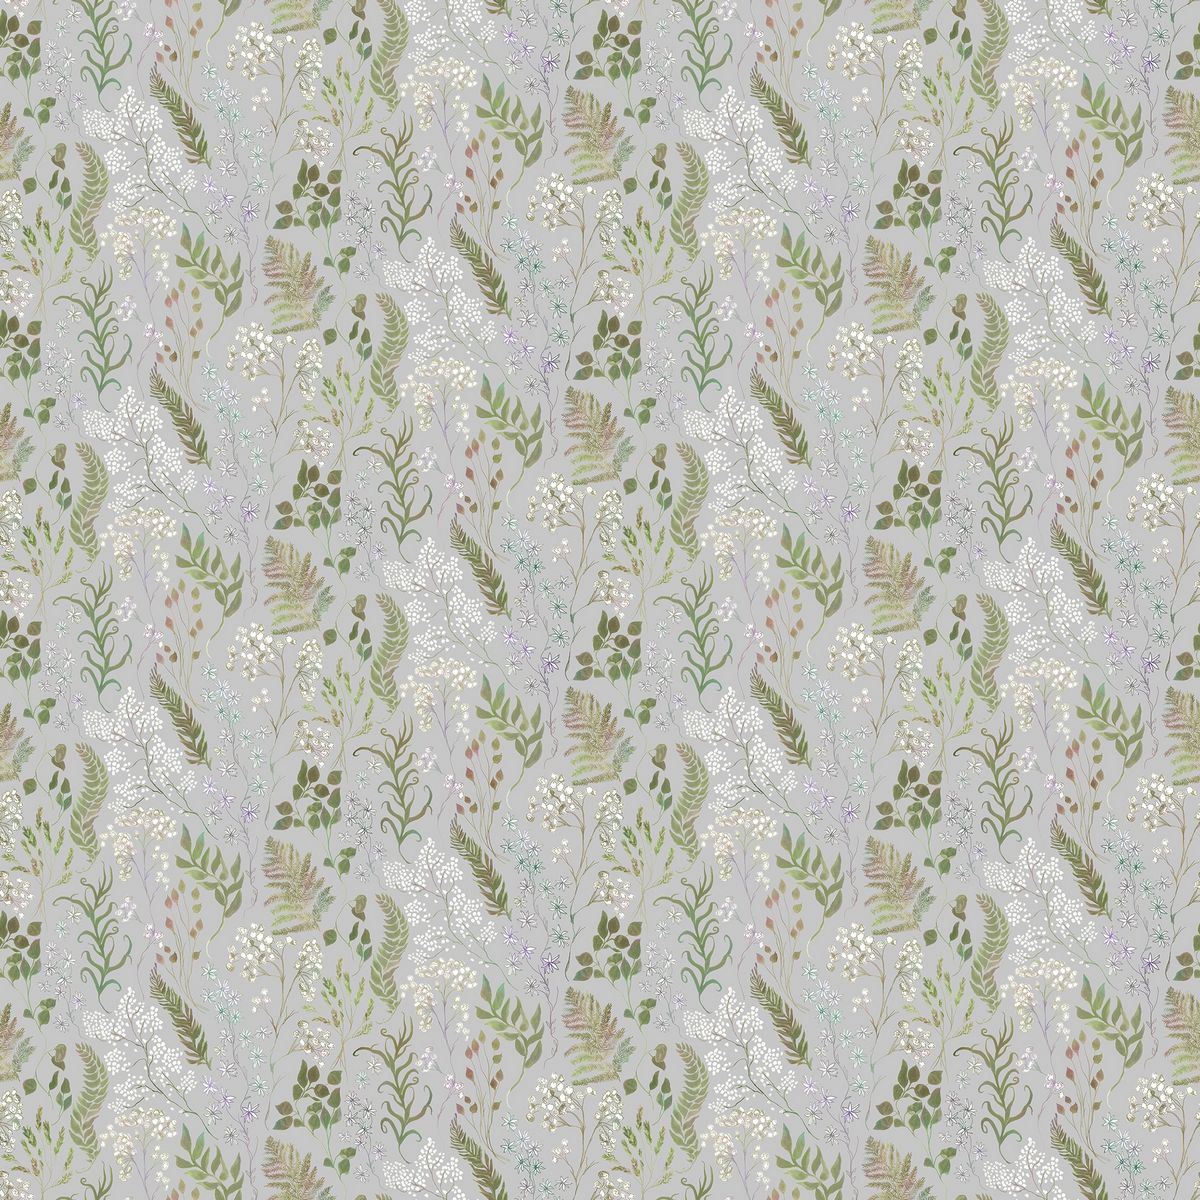 Aileana Dove Fabric by Voyage Maison